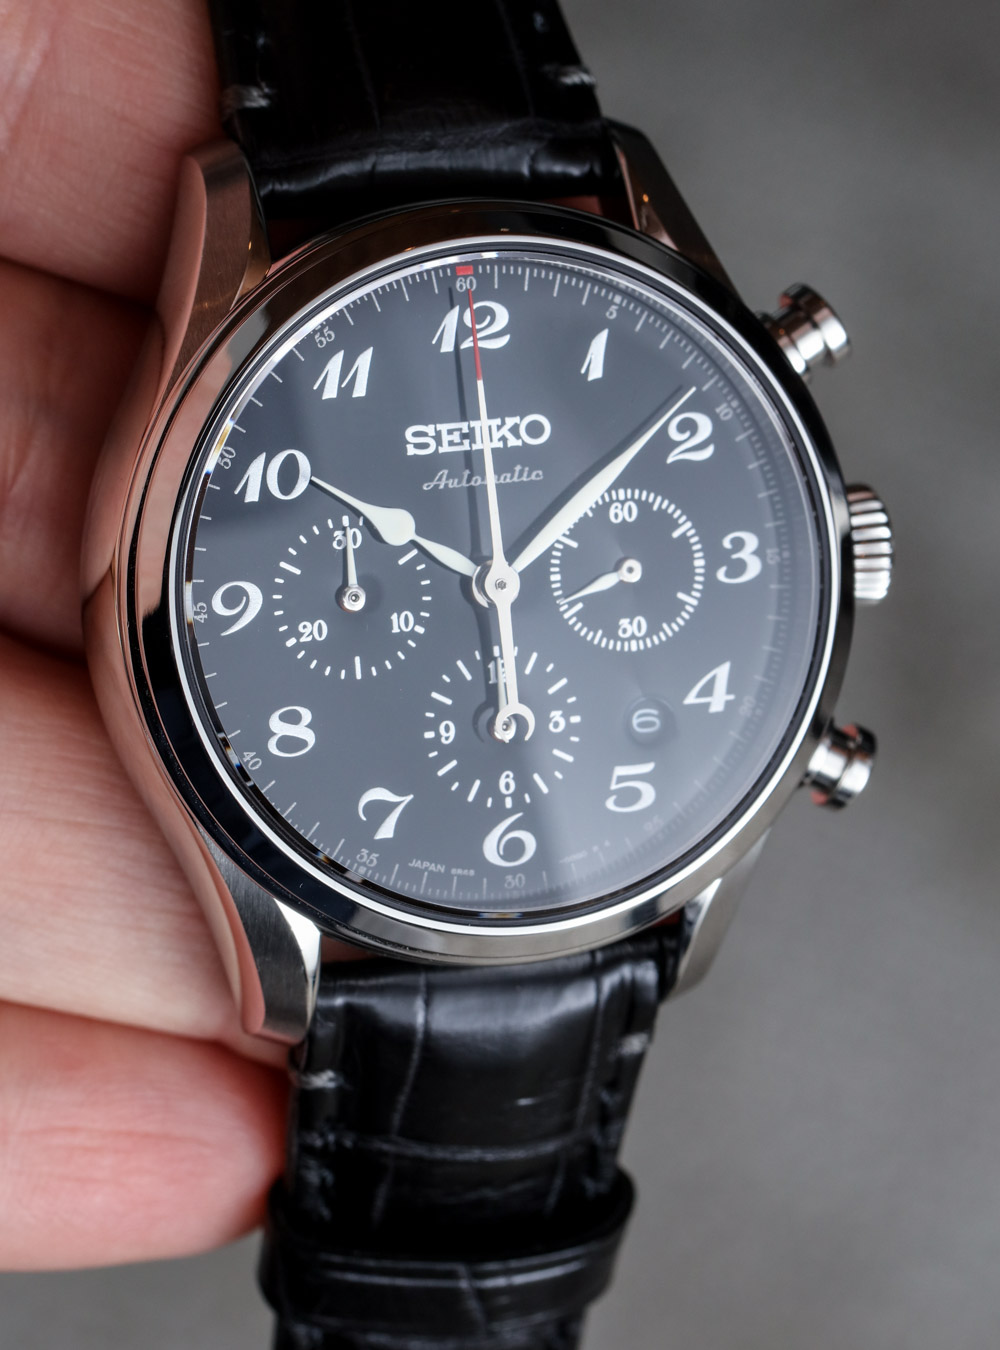 Seiko Presage Automatic Chronograph SRQ019 & SRQ021 Limited Edition Watches  Hands-On | aBlogtoWatch